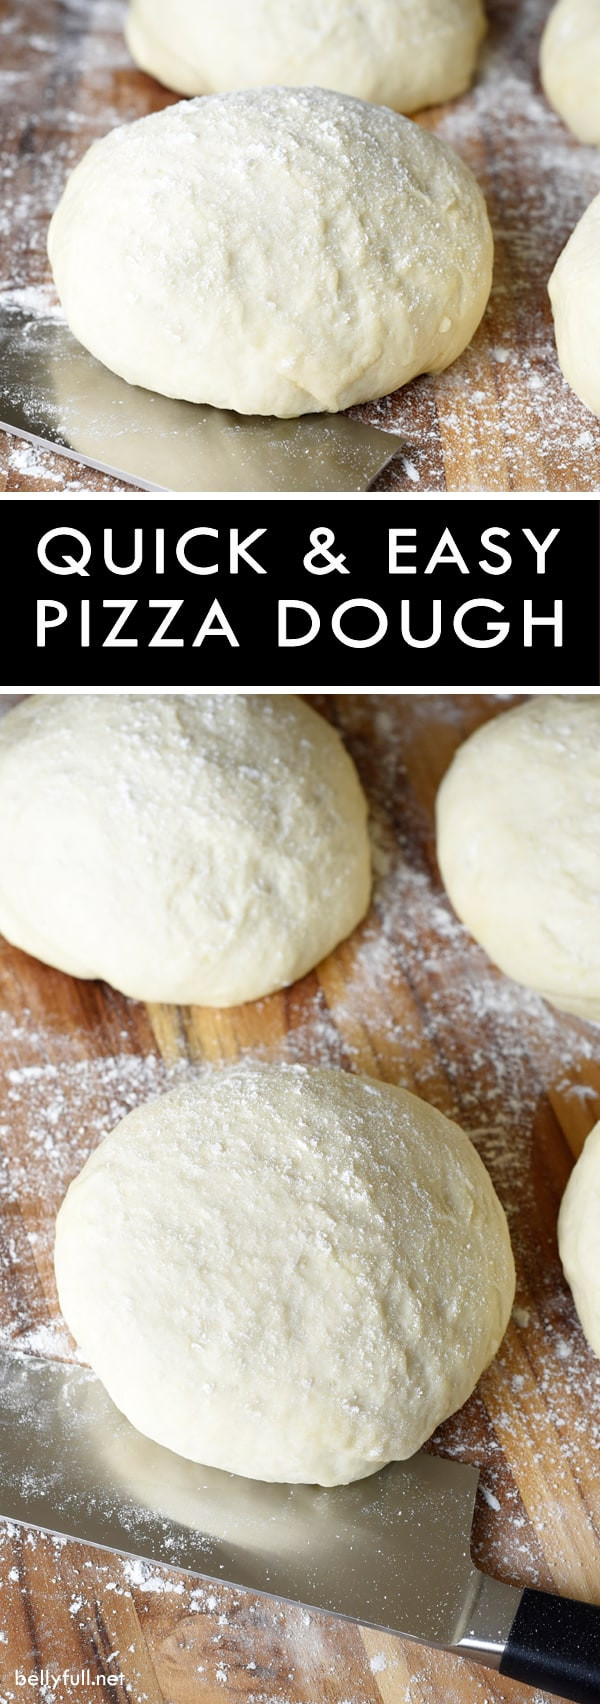 Quick Pizza Dough
 Quick and Easy Pizza Dough Belly Full